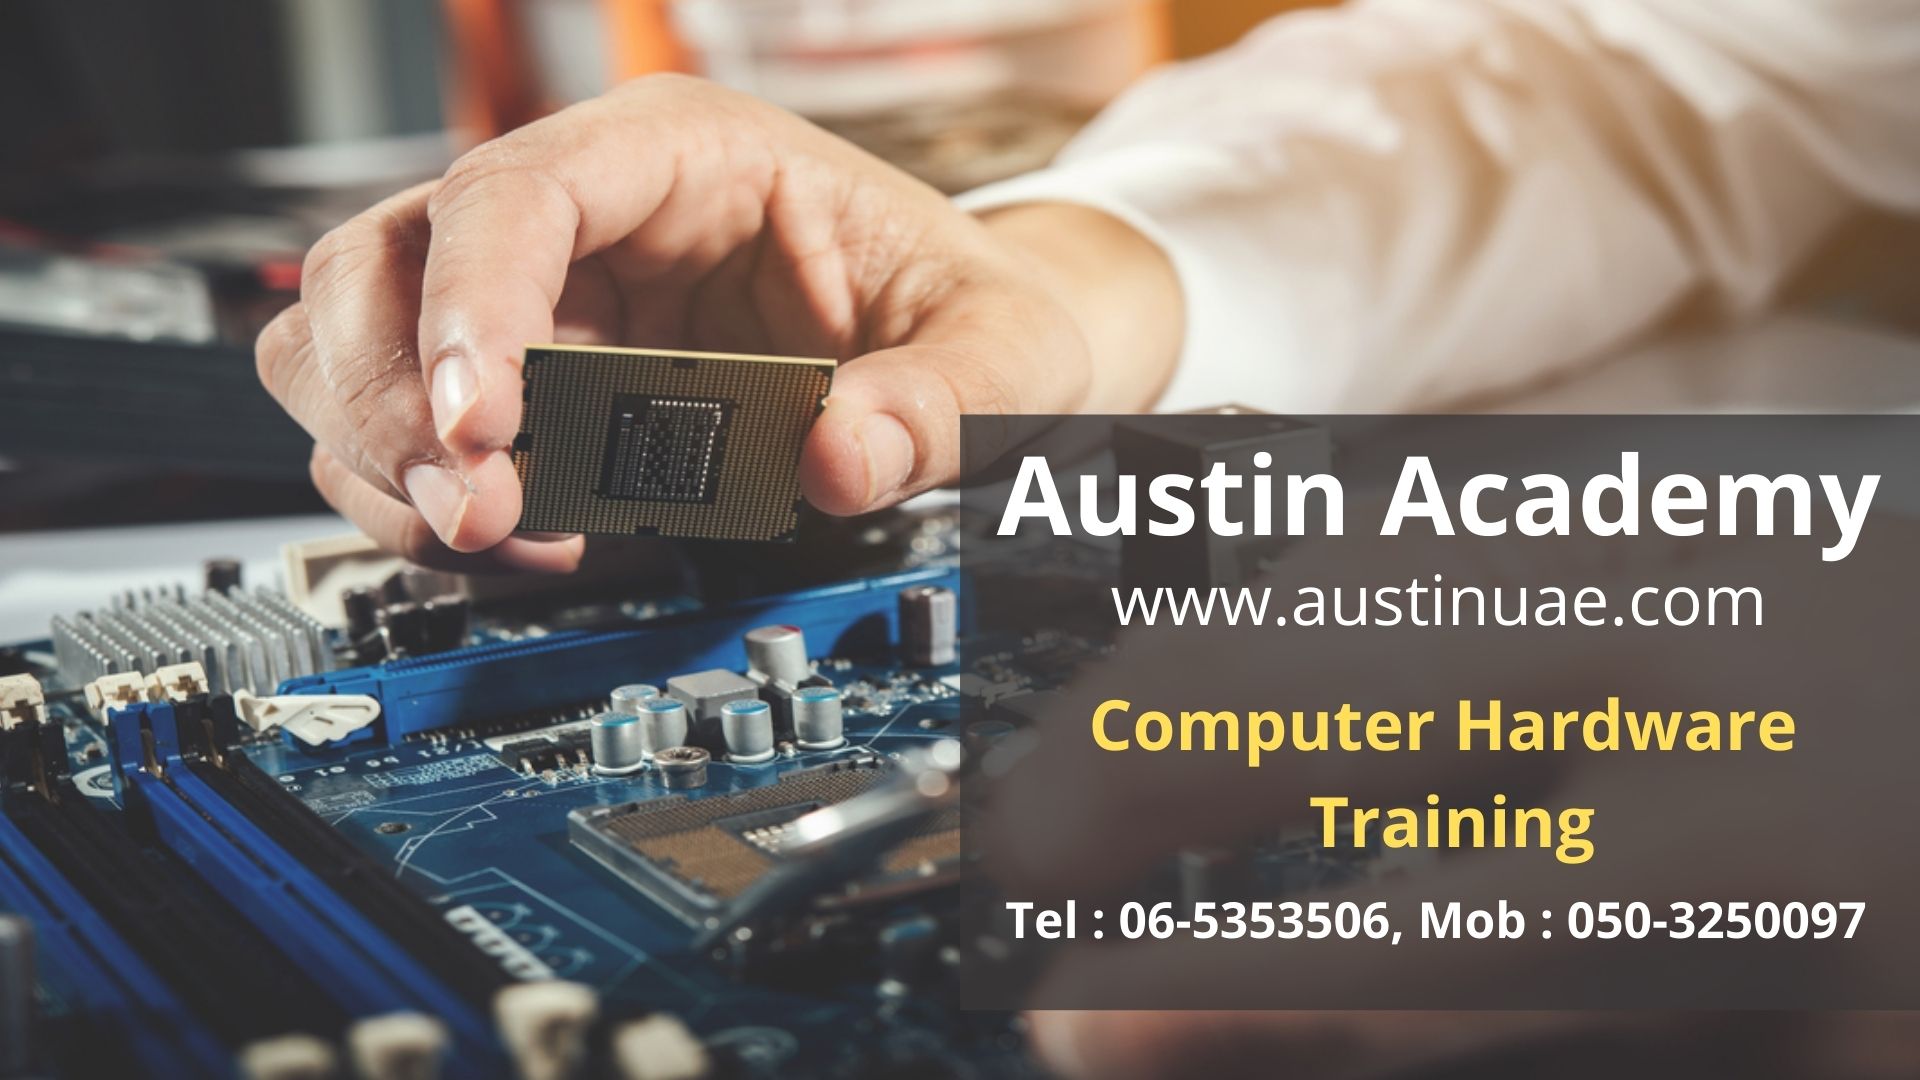 Computer Hardware Classes In Sharjah With Great Offer 0503250097